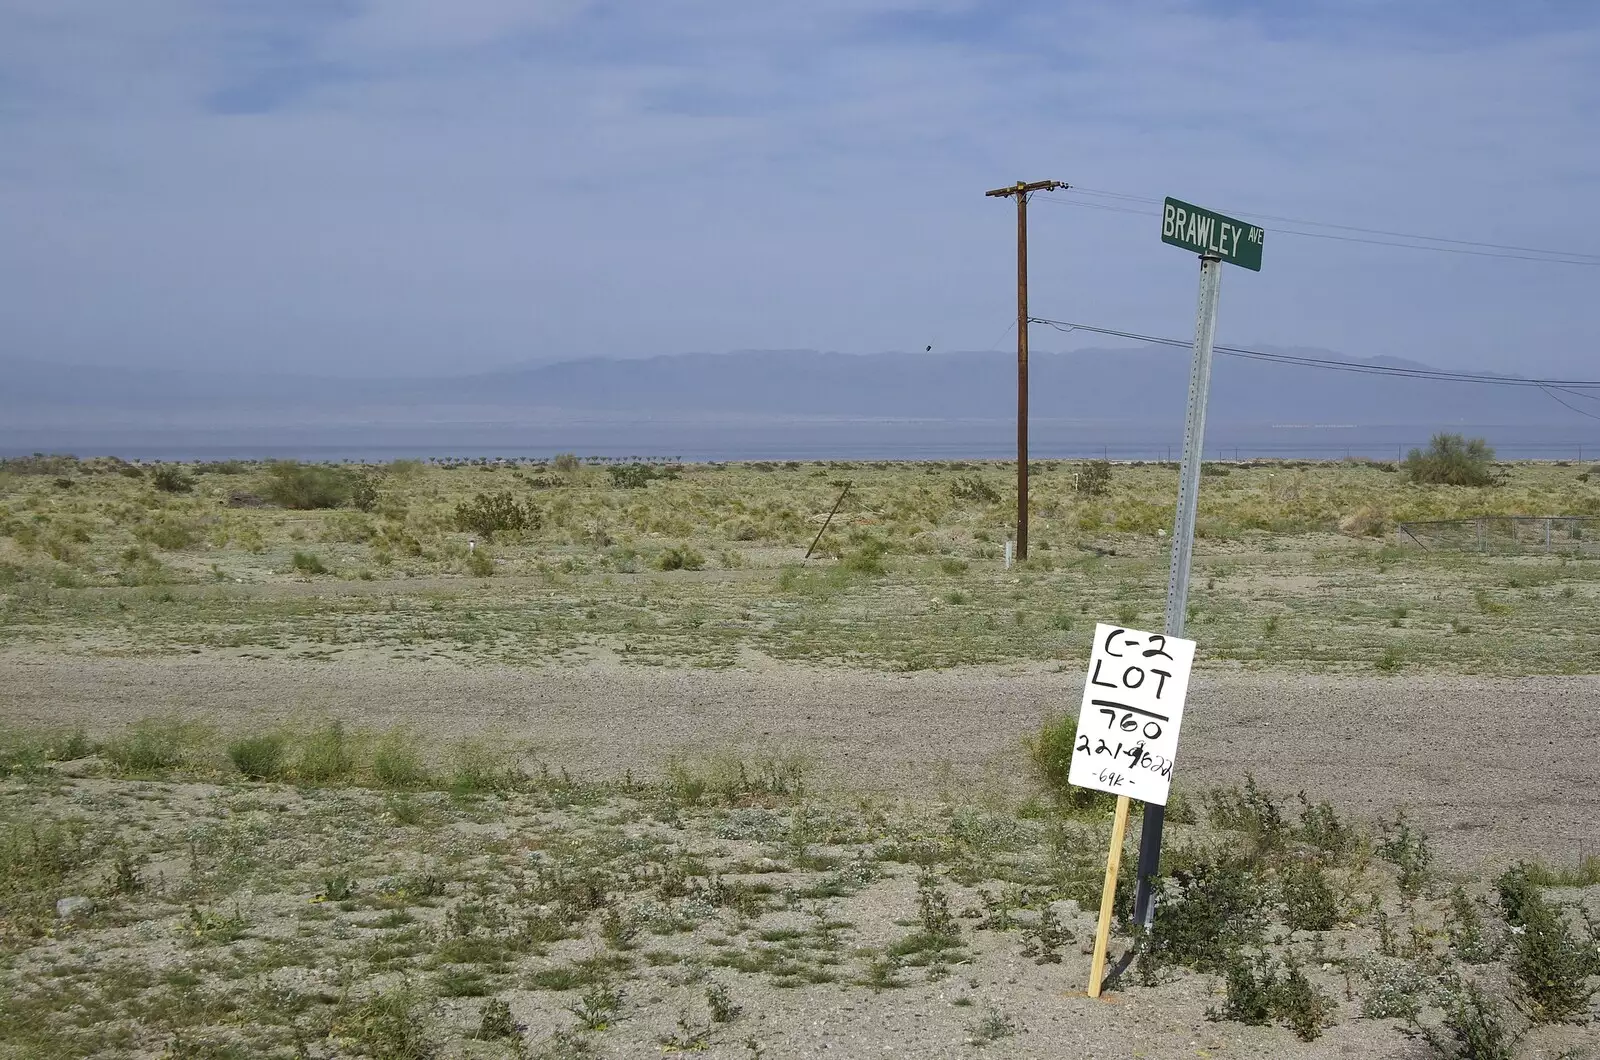 Optimistic plots of land are for sale, from The End of the World: Julian to the Salton Sea and Back, California, US - 1st March 2008